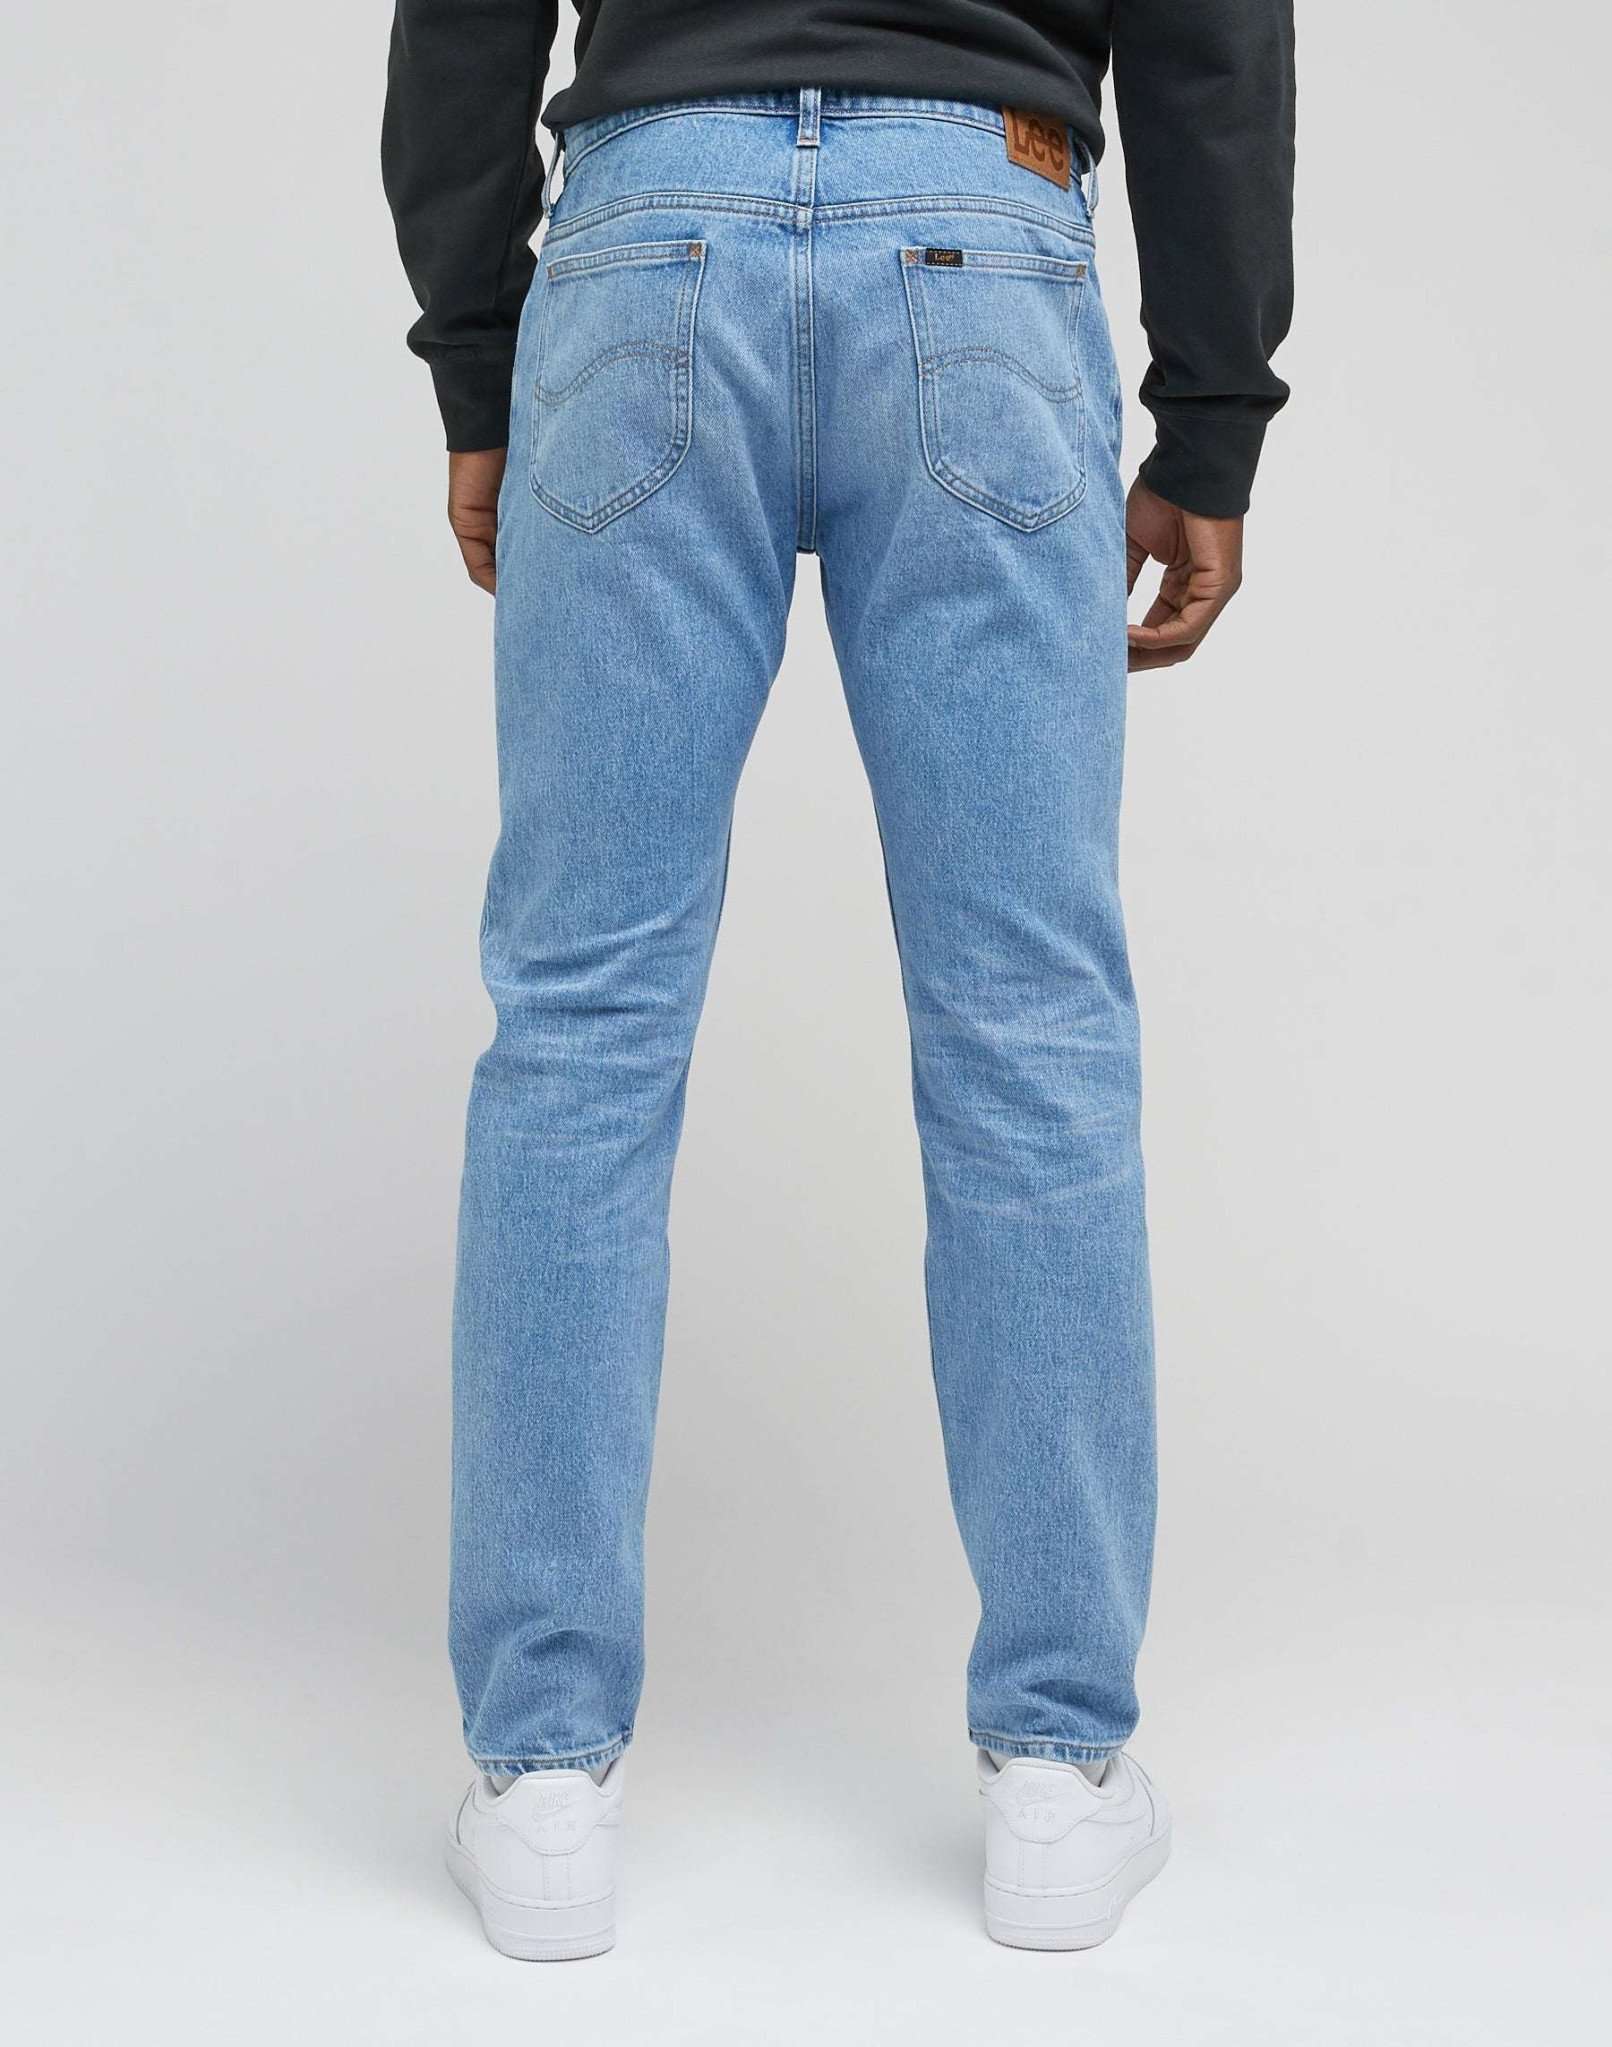 Rider in Light Seabreeze Jeans Lee   